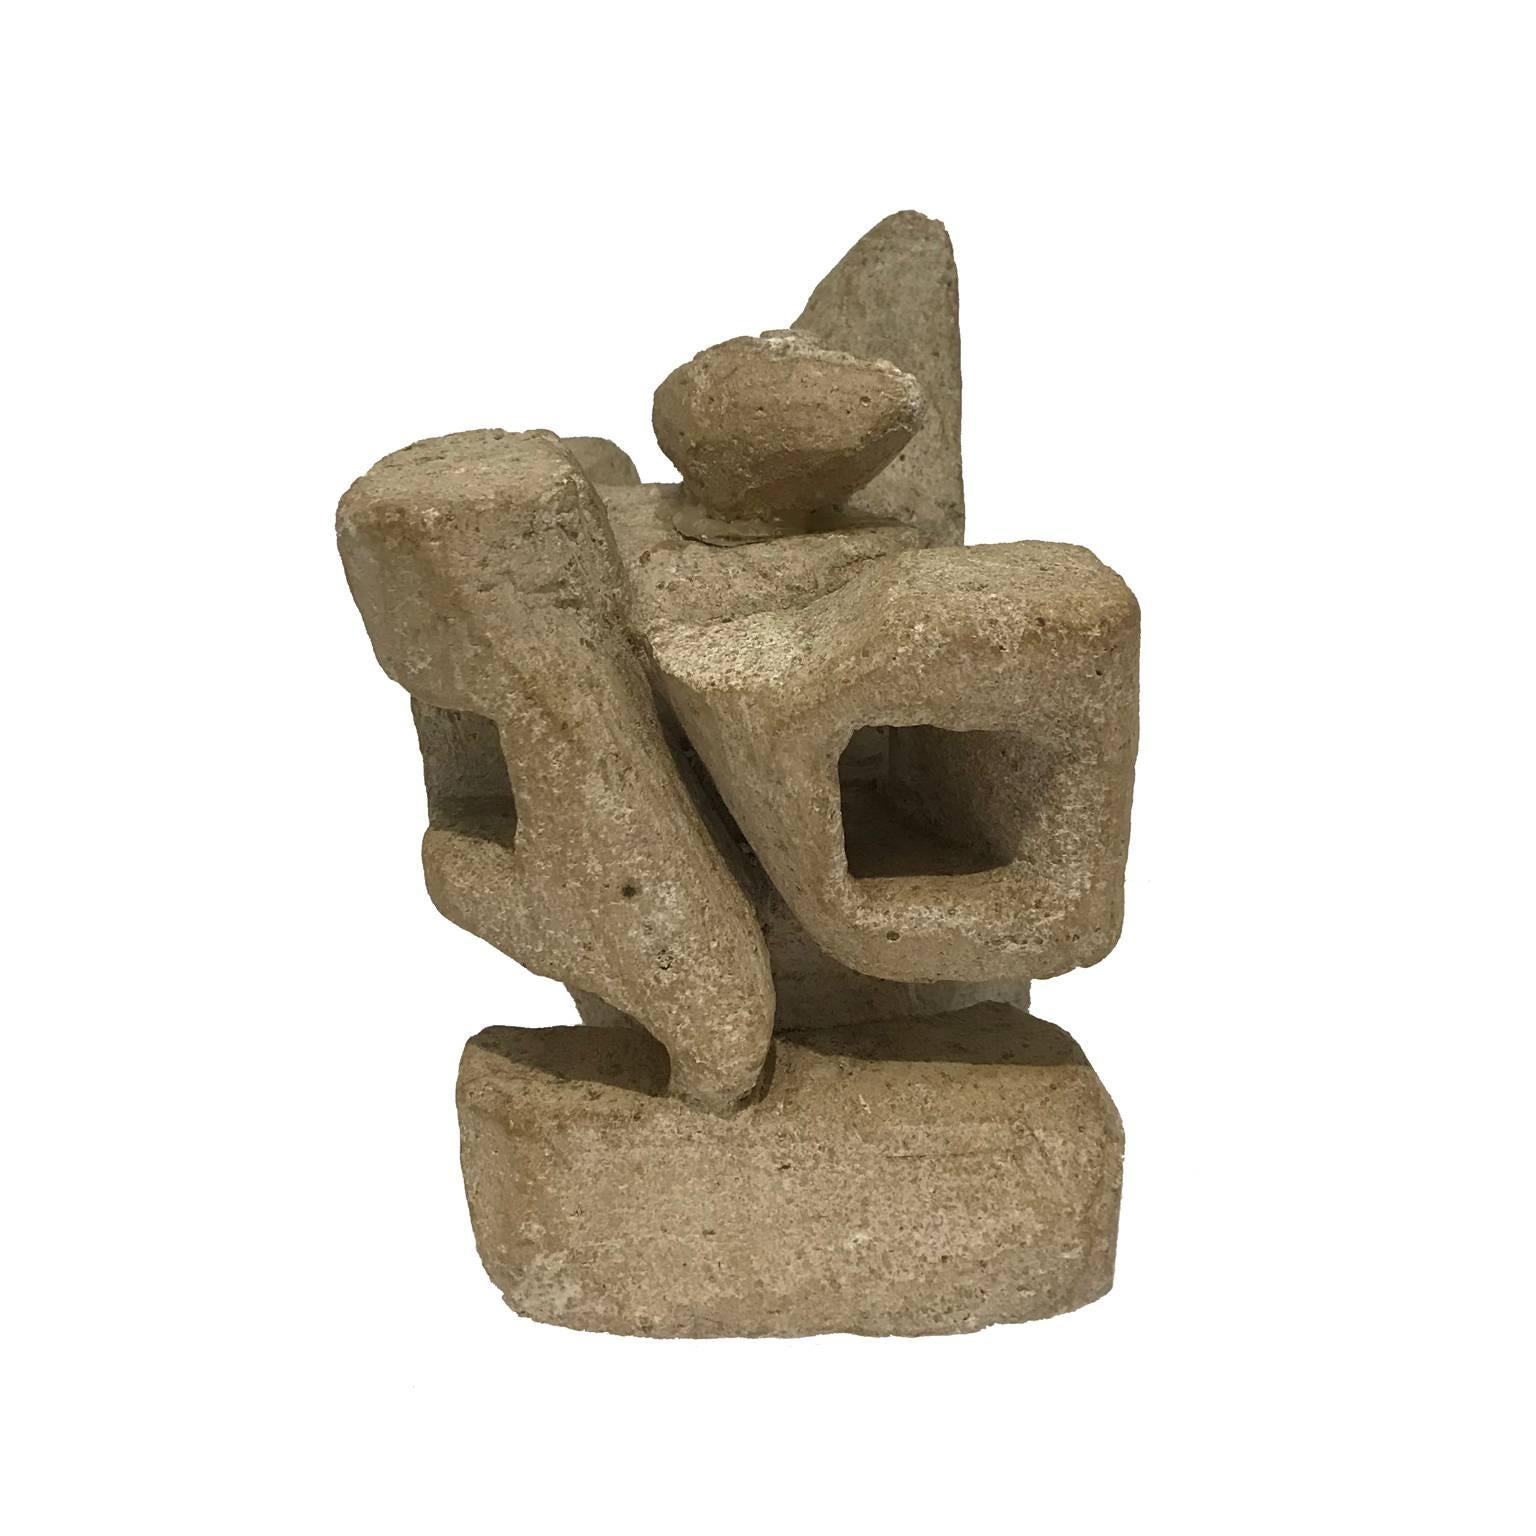 American 1970s Abstract Sandstone Sculpture #2